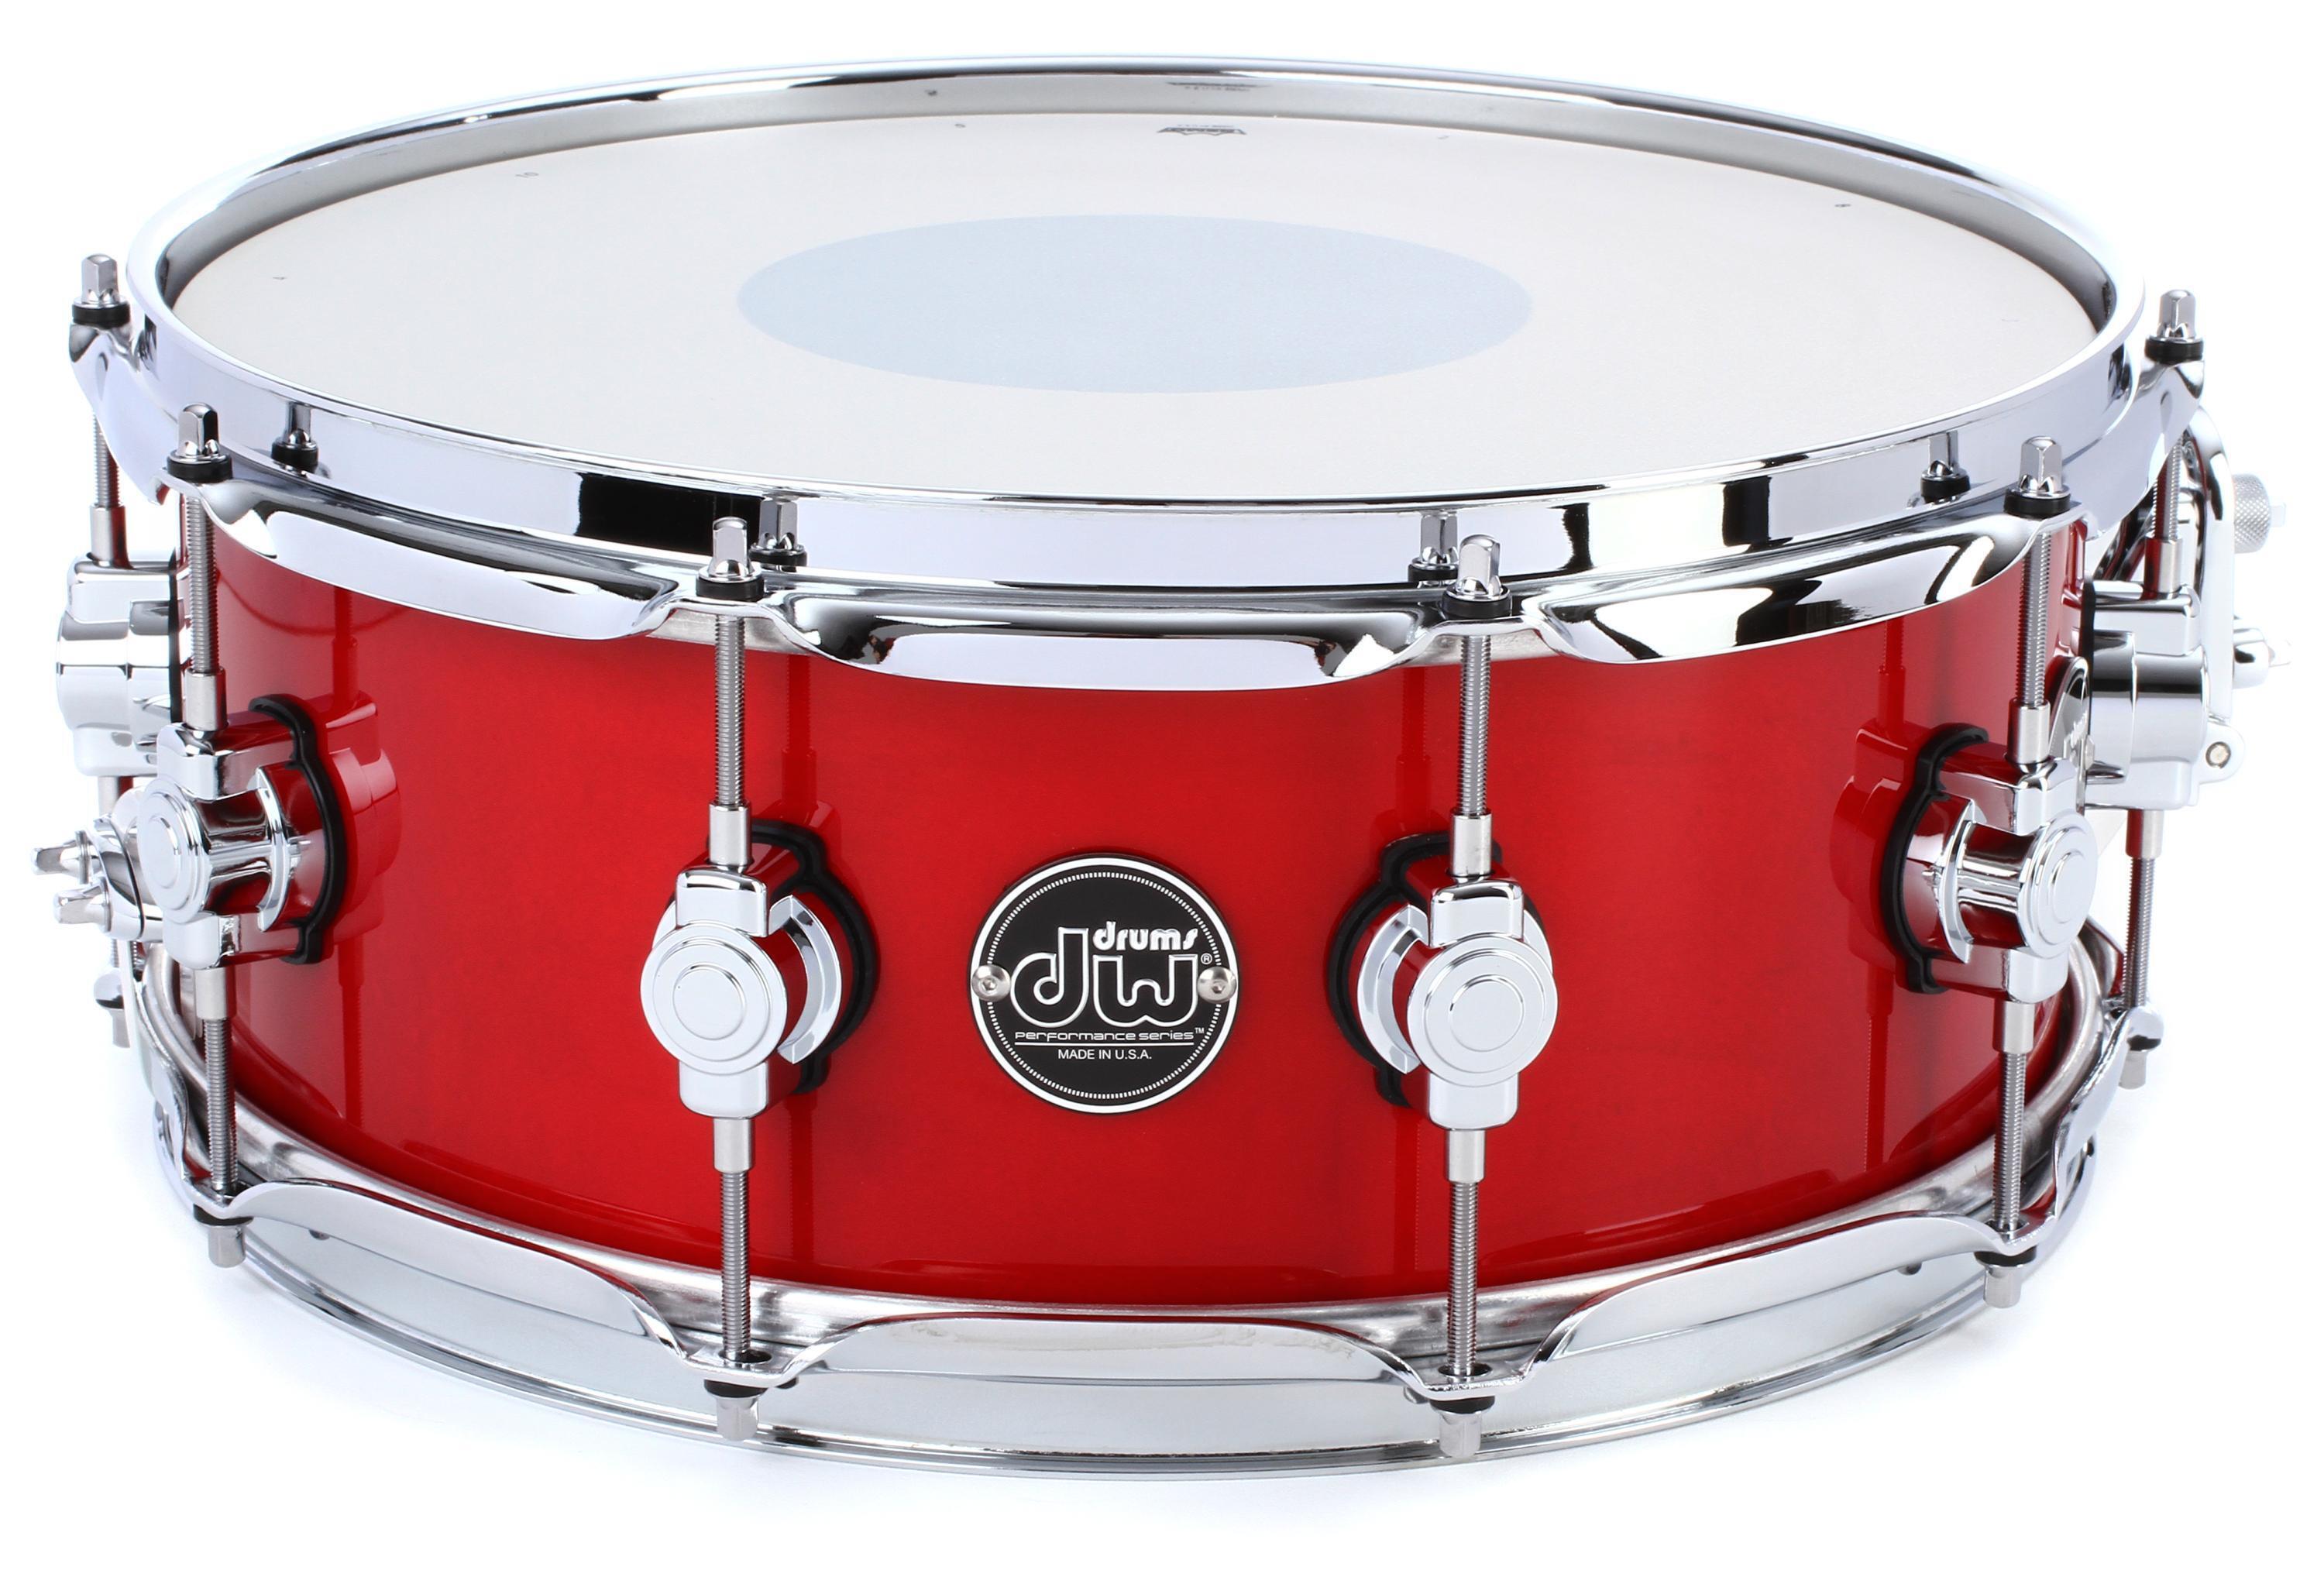 DW Performance Series 5.5 x 14-inch Snare Drum - Candy Apple Red Lacquer